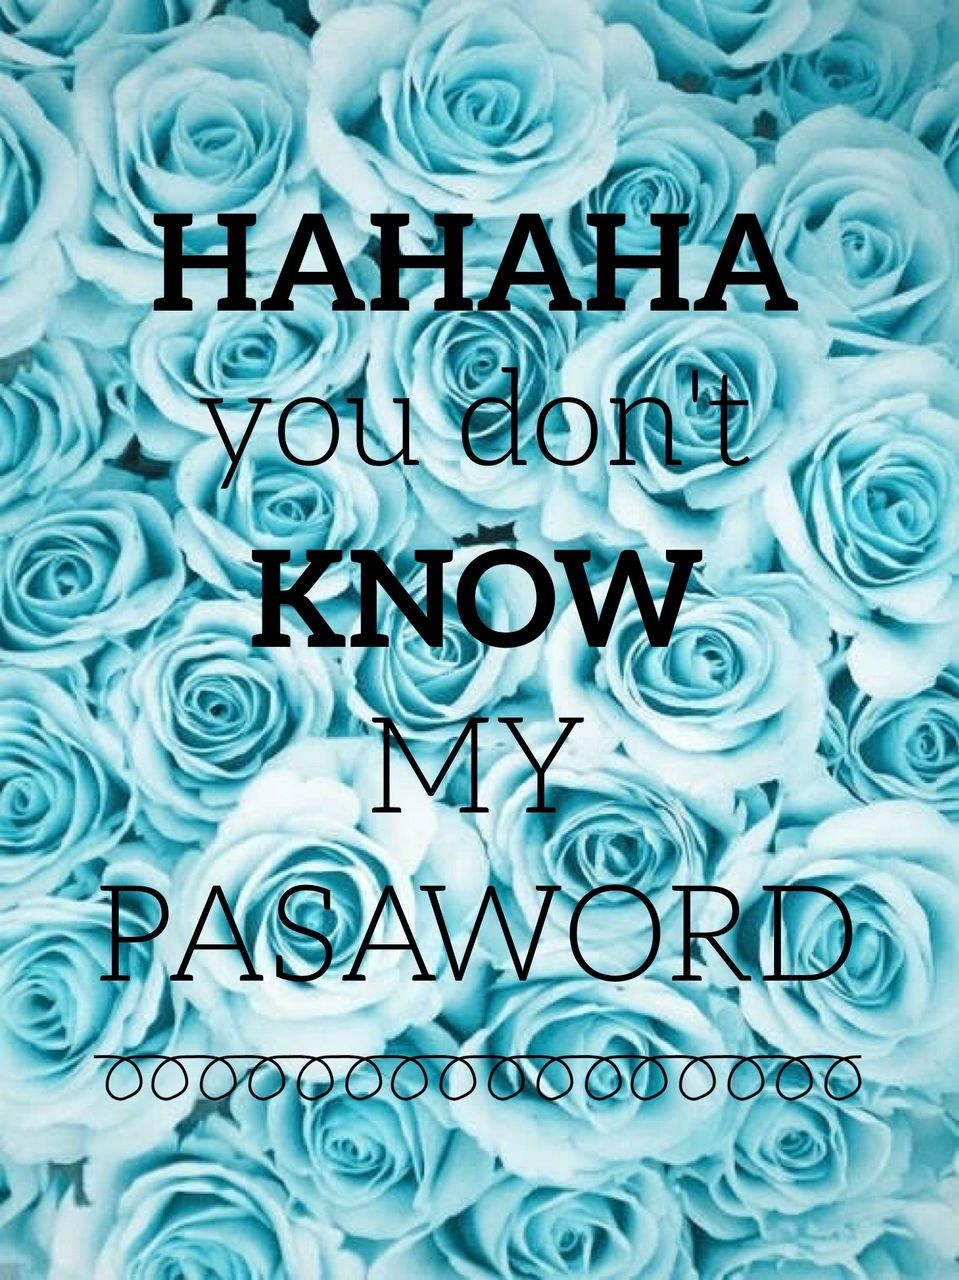 Image about blue in hahaha YOU DON'T KNOW MY PASSWORD